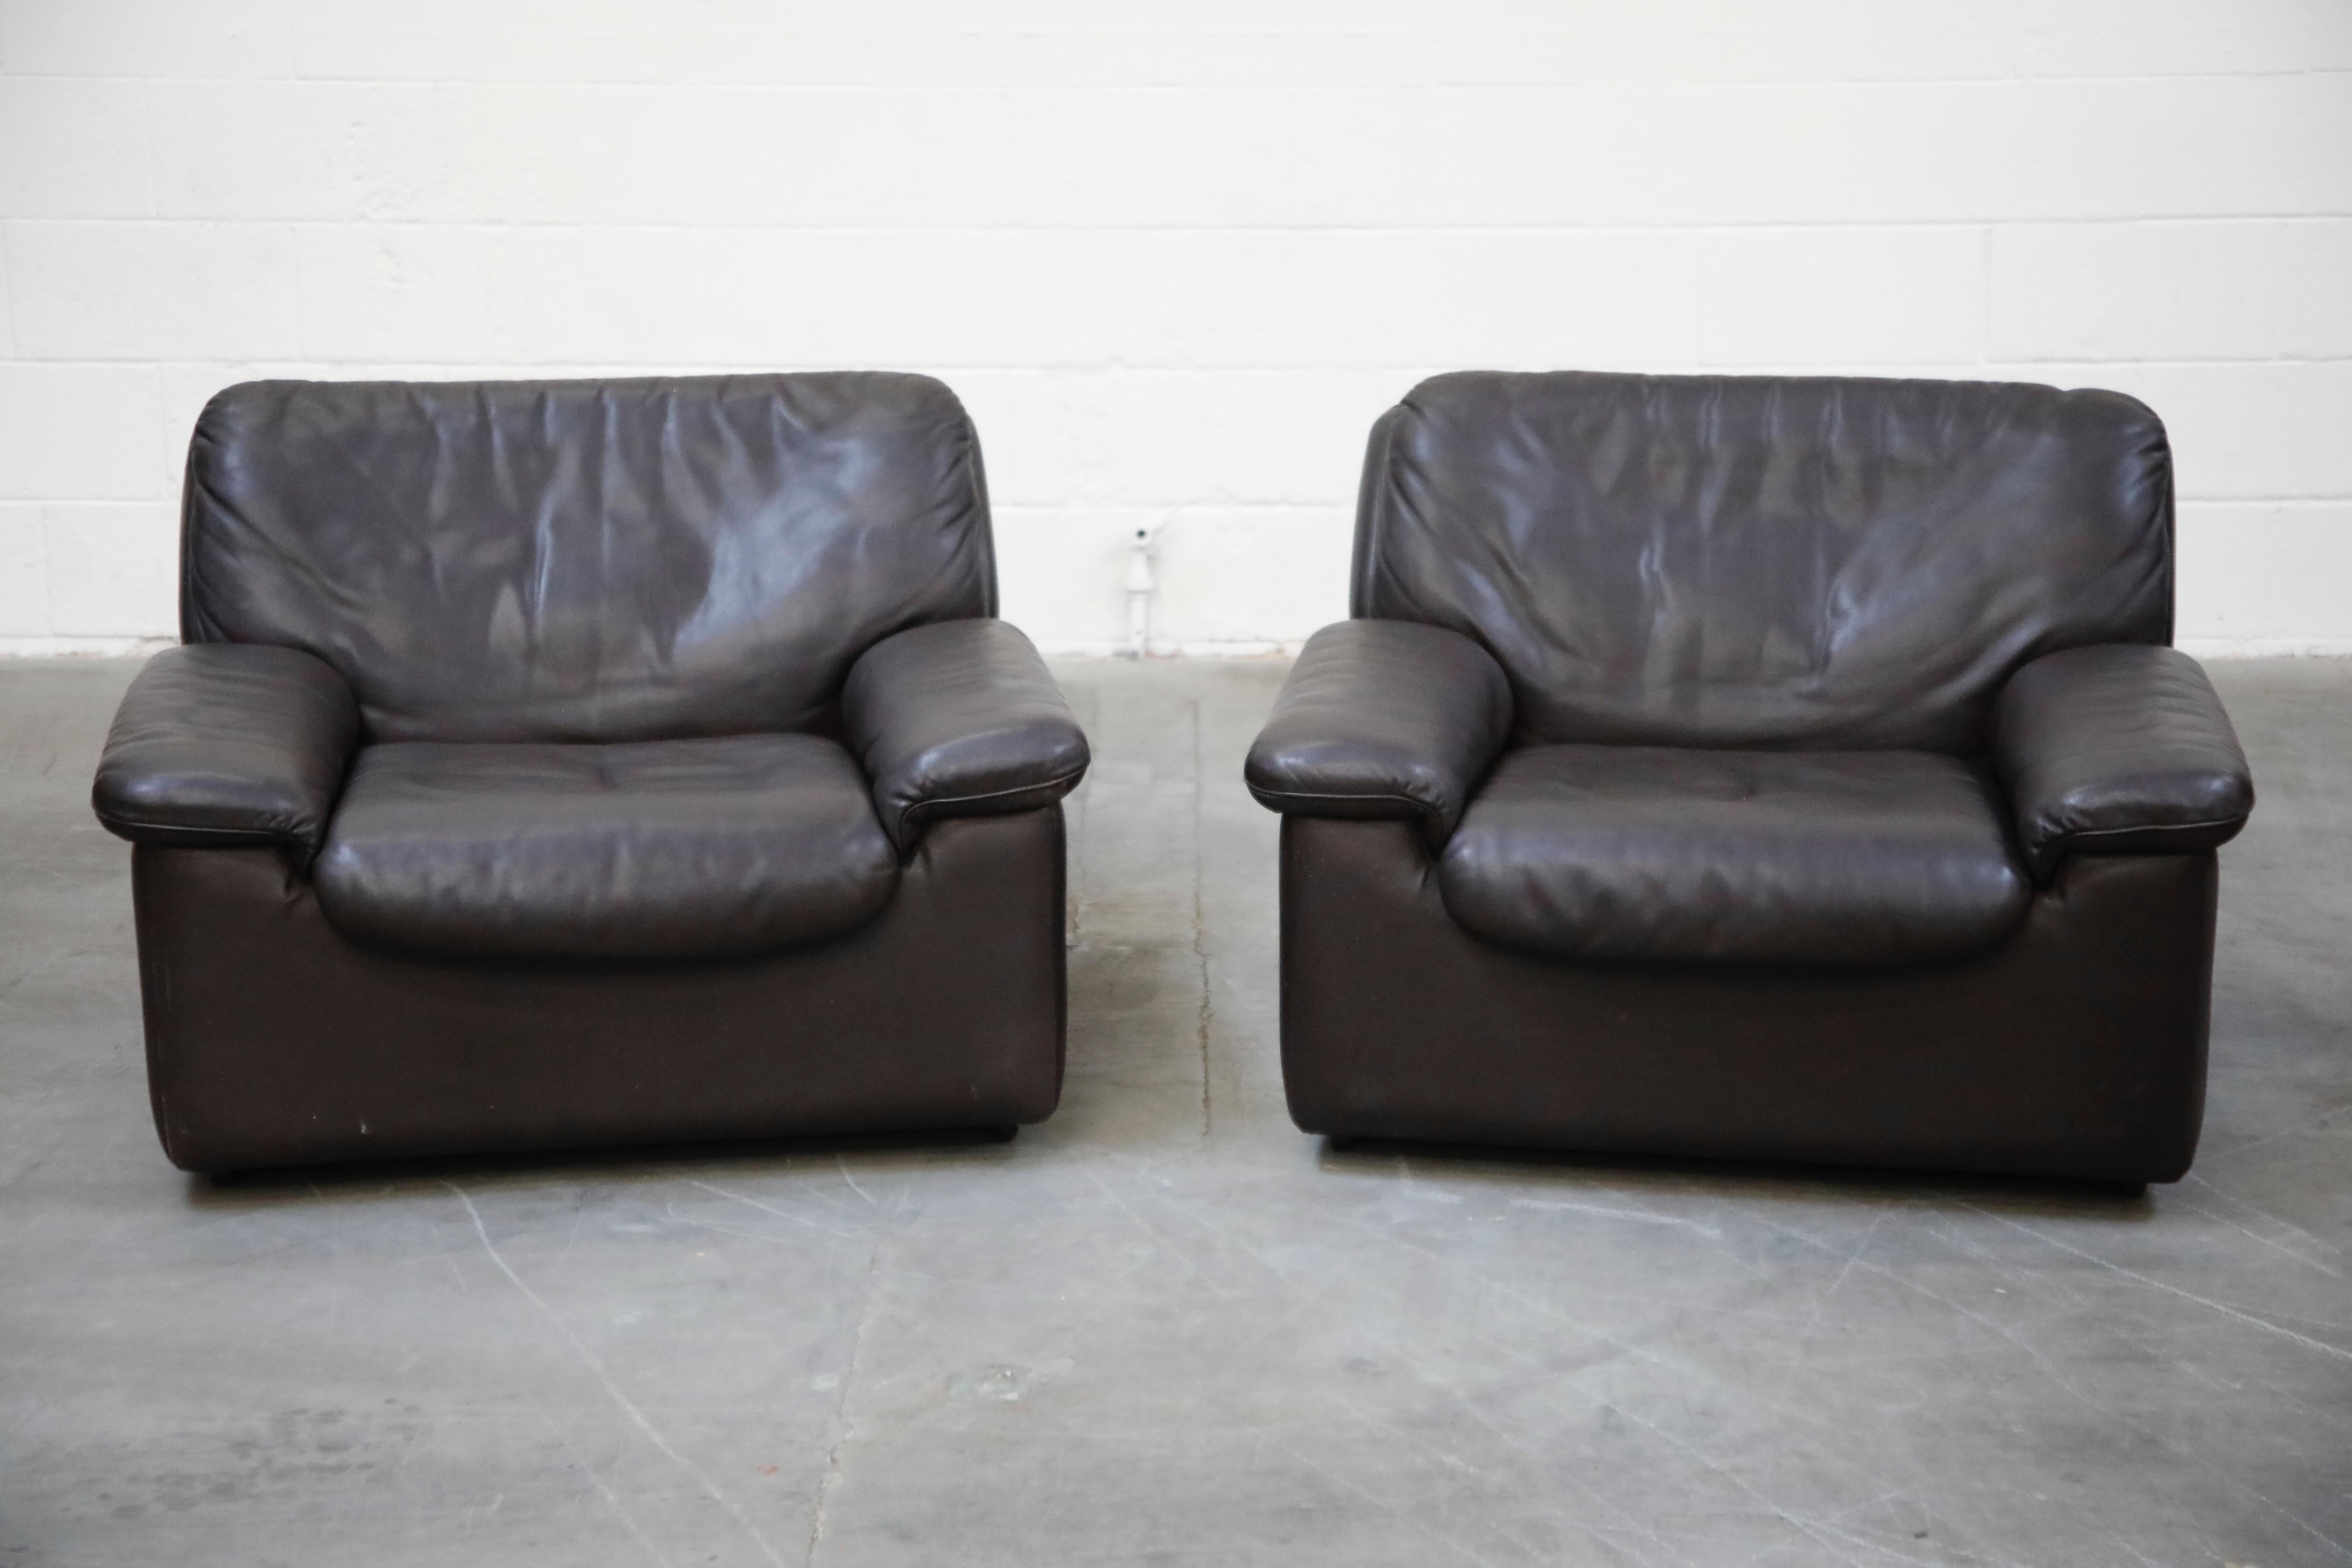 Scandinavian Modern Pair of Leather Lounge Armchairs by De Sede, Switzerland, 1960s, Signed